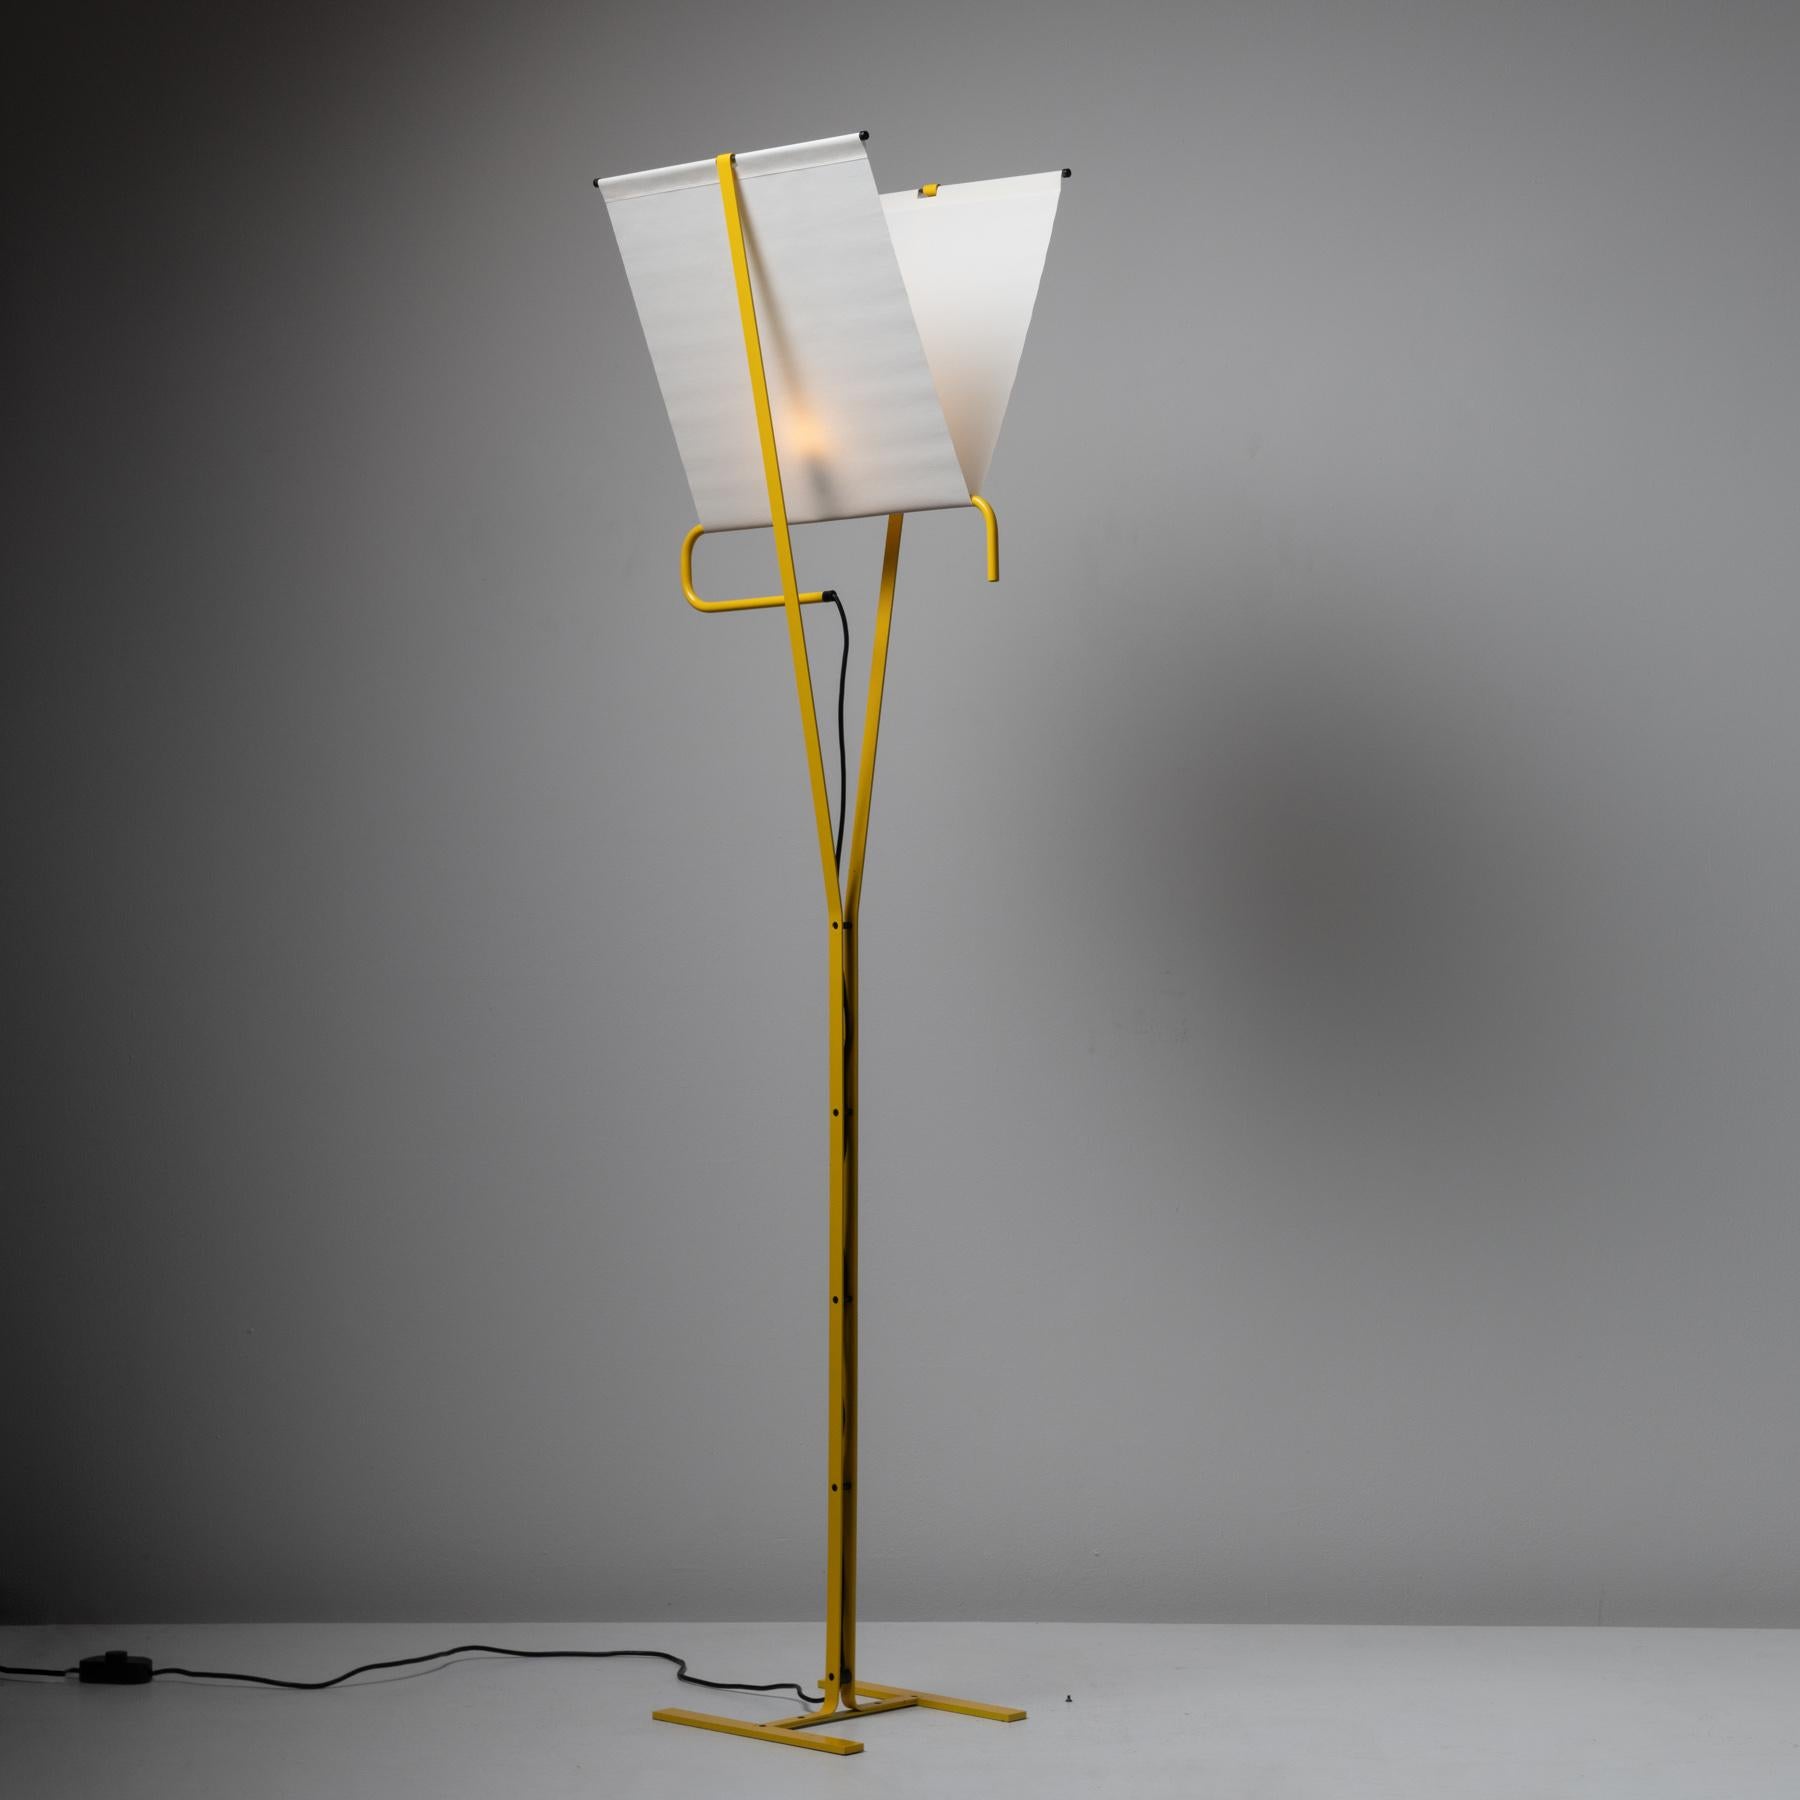 'Le Falene' floor lamp by Piero De Martini for Arteluce. Designed and manufactured in Italy, circa the 1980s. Linen shades are sub-formed onto yellow enameled rod bases. The lamp holds a single E27 socket, adapted for the US. We recommend a single